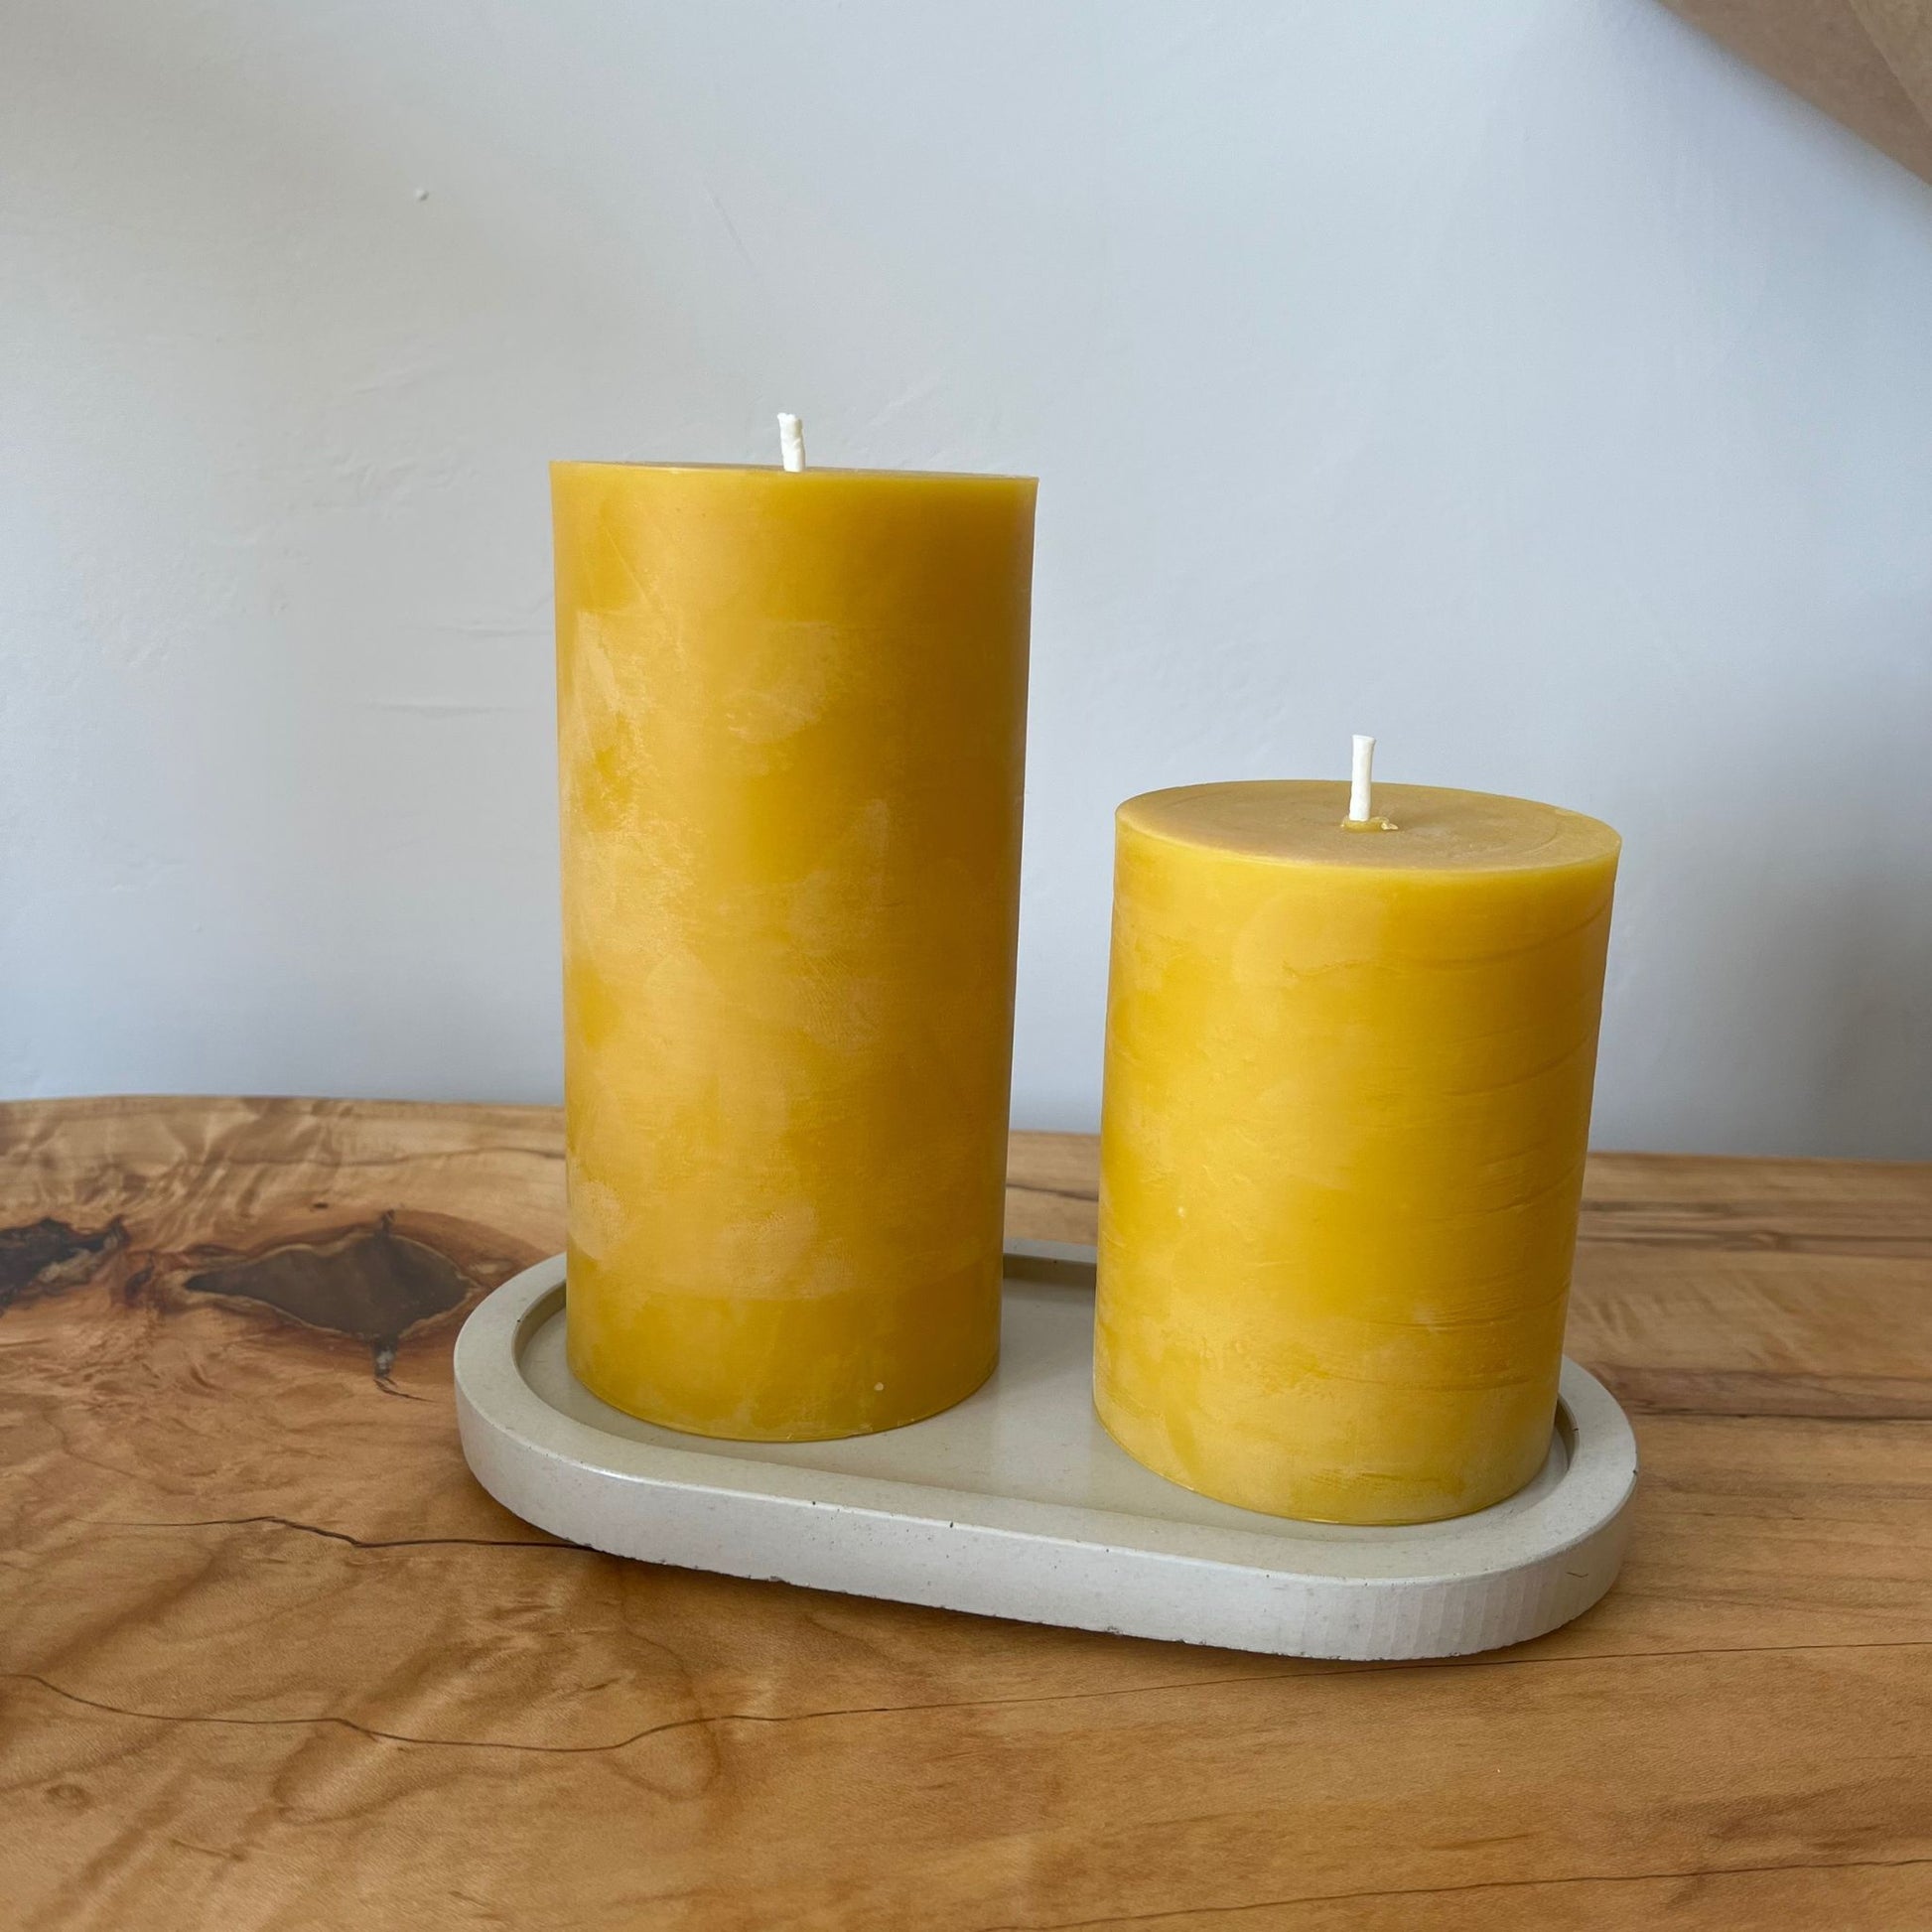 Two beeswax candles of different sizes on a ceramic plate